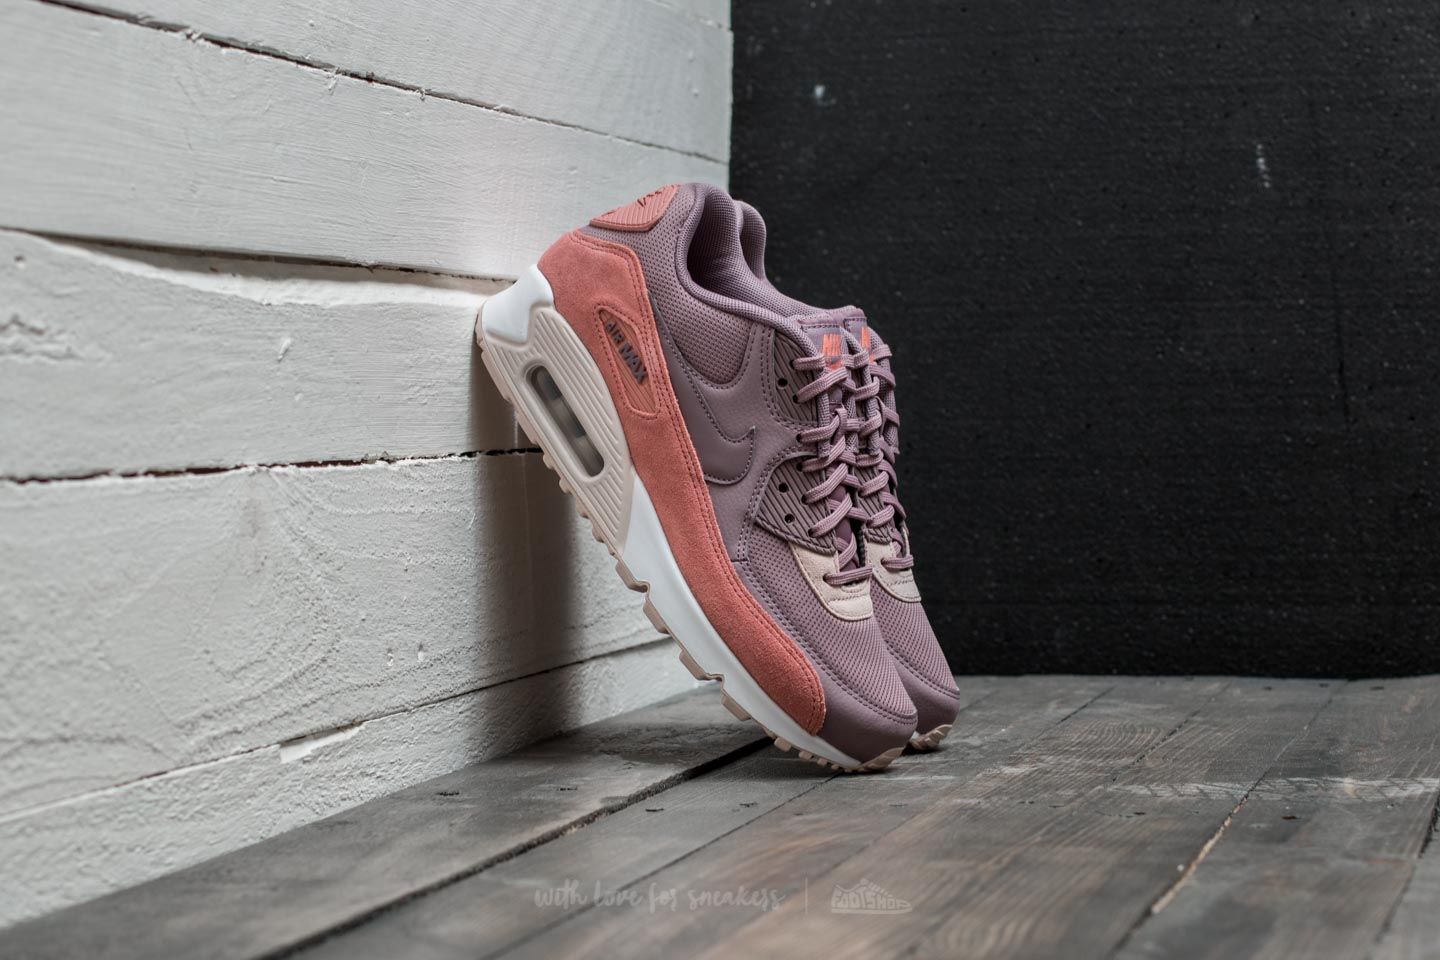 Chaussures et baskets femme Nike Wmns Air Max 90 Red Stardust/ Taupe Grey